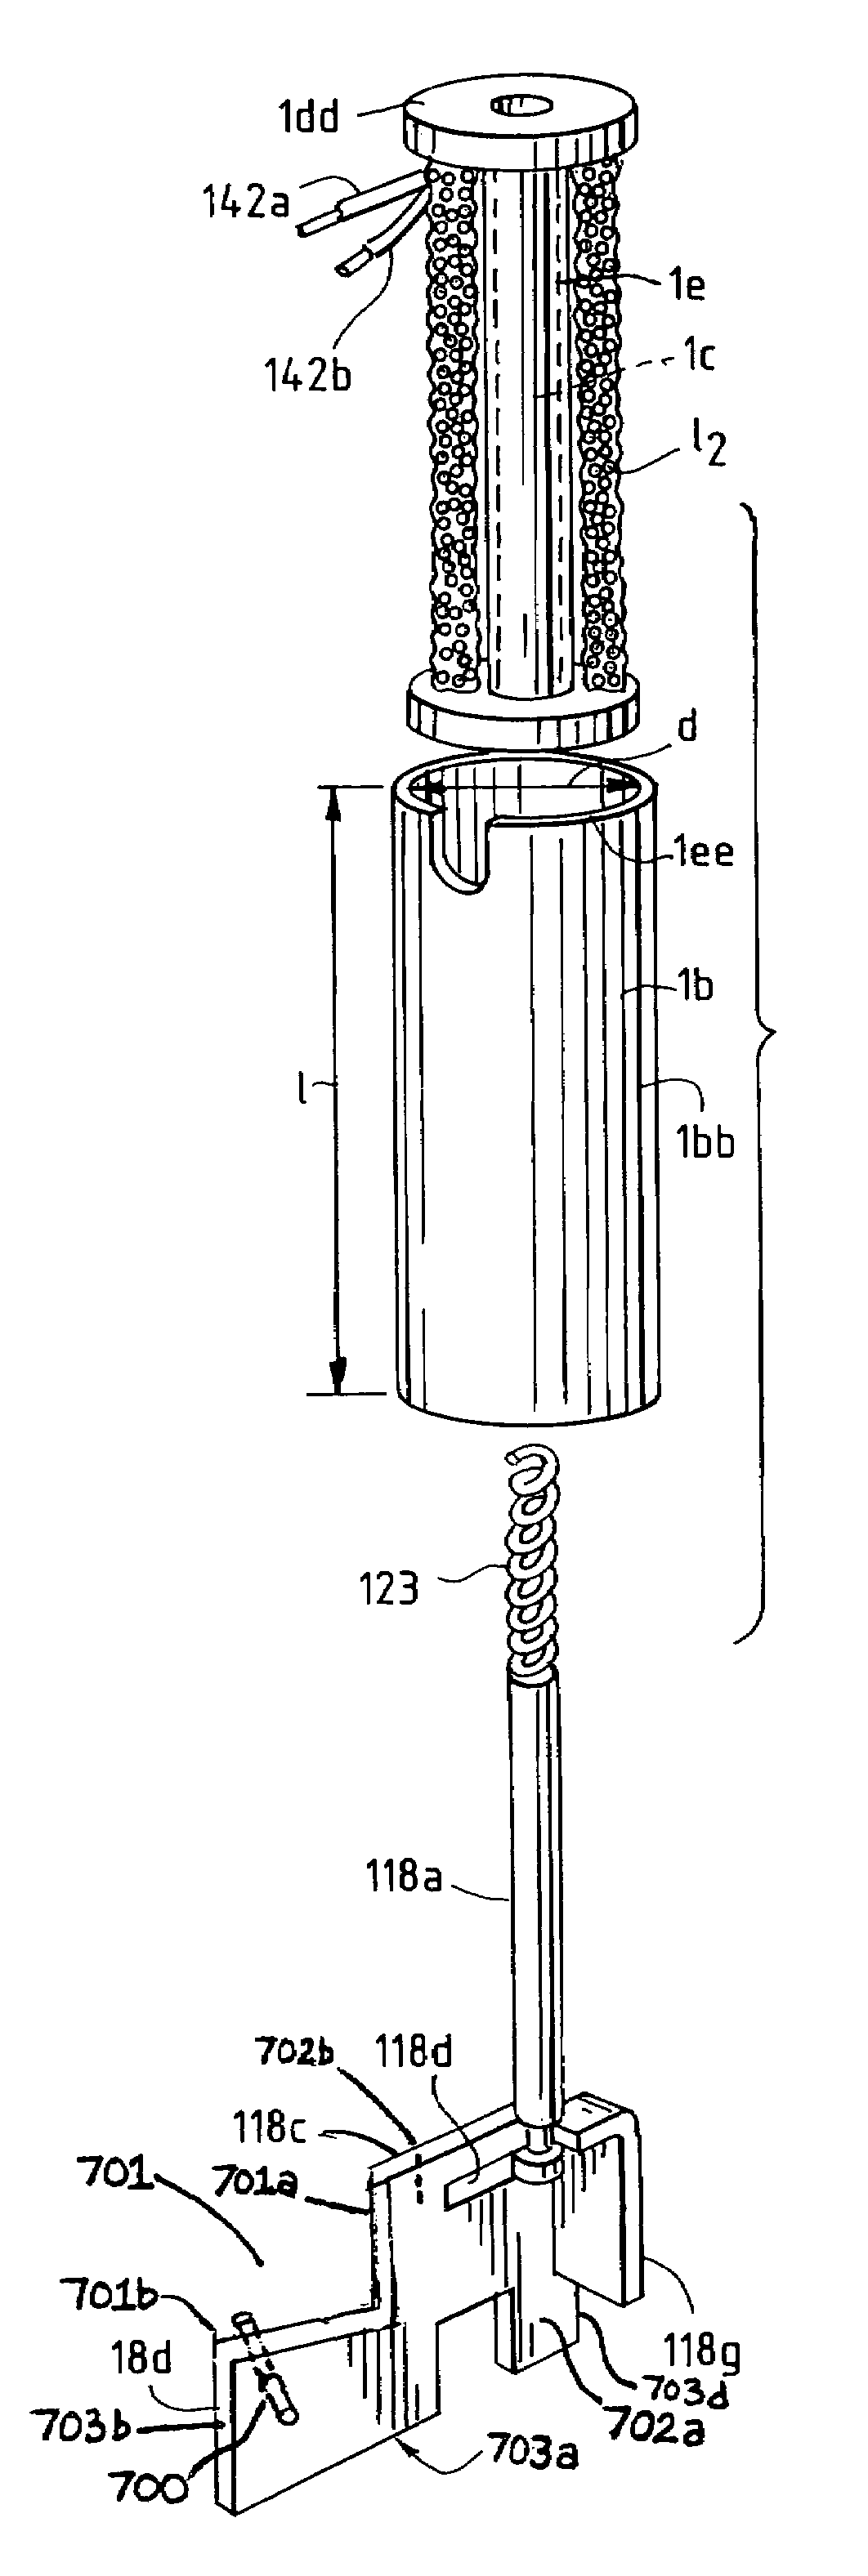 Second improved electromagnetic integrative door locking device and method of installation